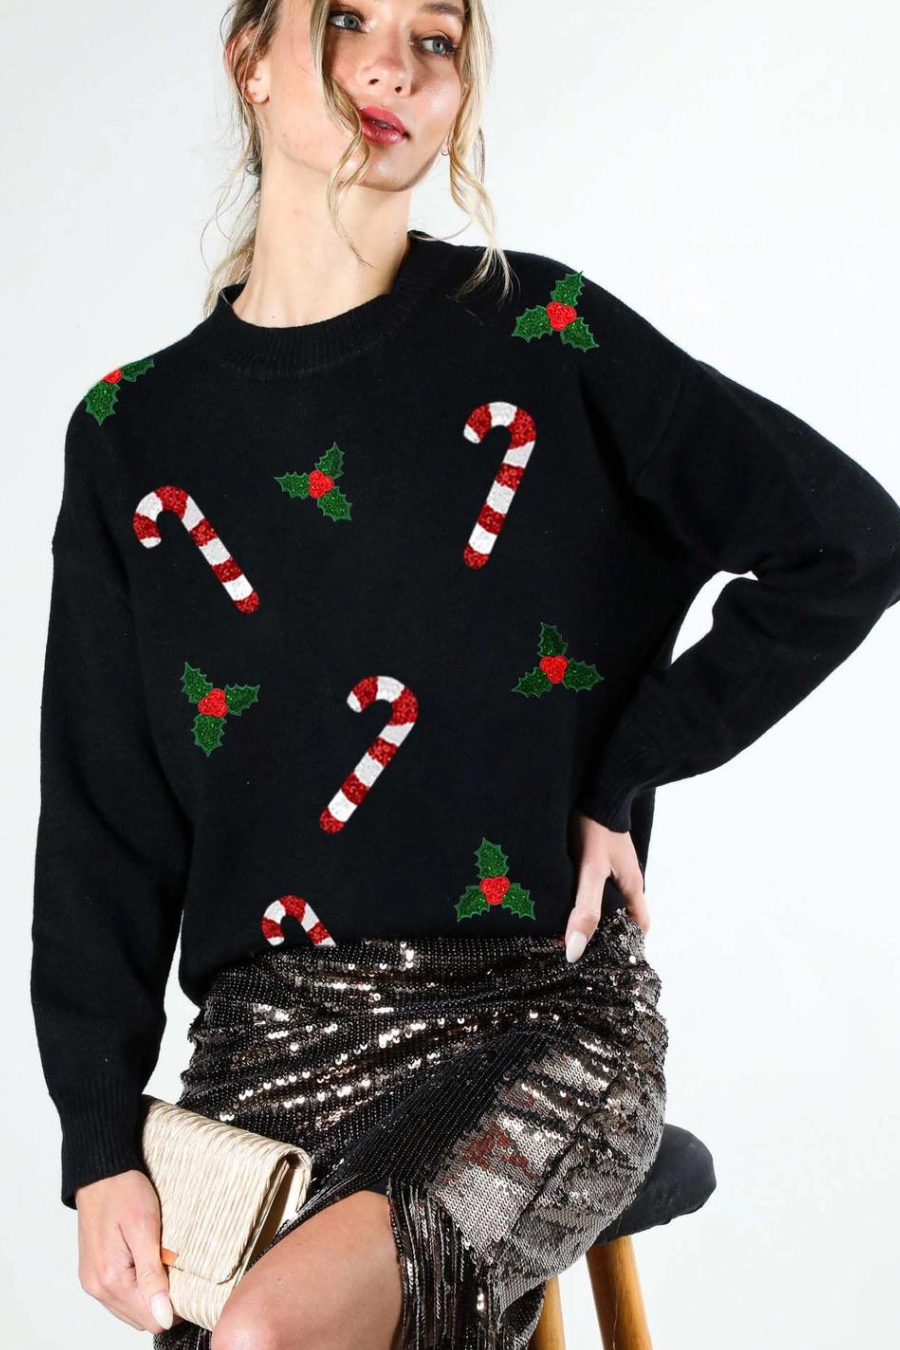 Candy Cane and Mistletoe Holiday Sweater